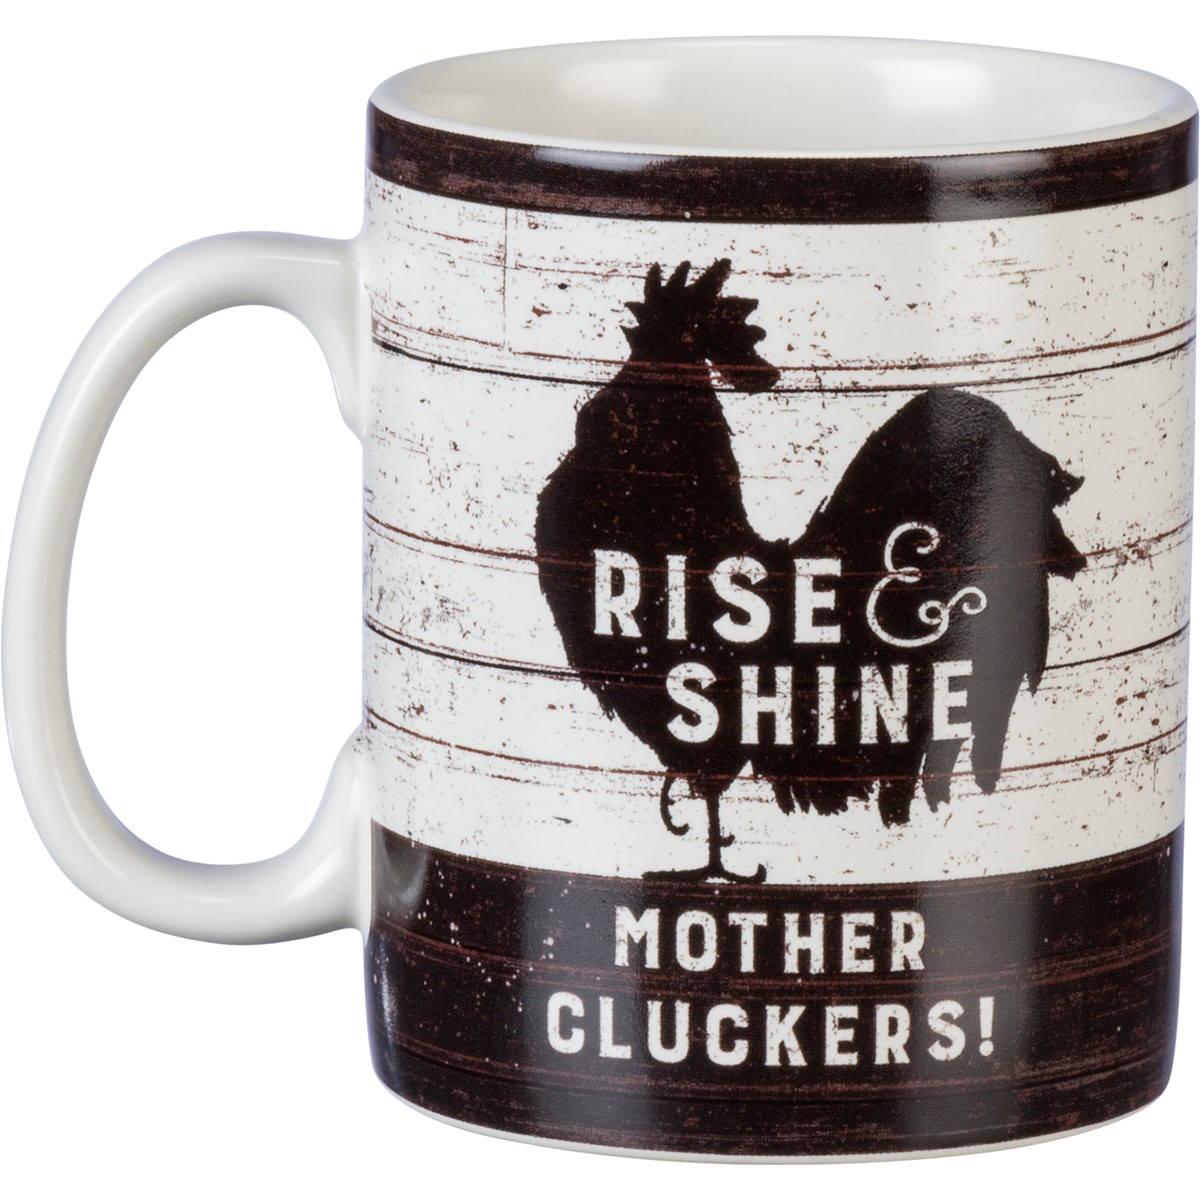 Rise & Shine Mother Cluckers Mug - Port Gamble General Store & Cafe